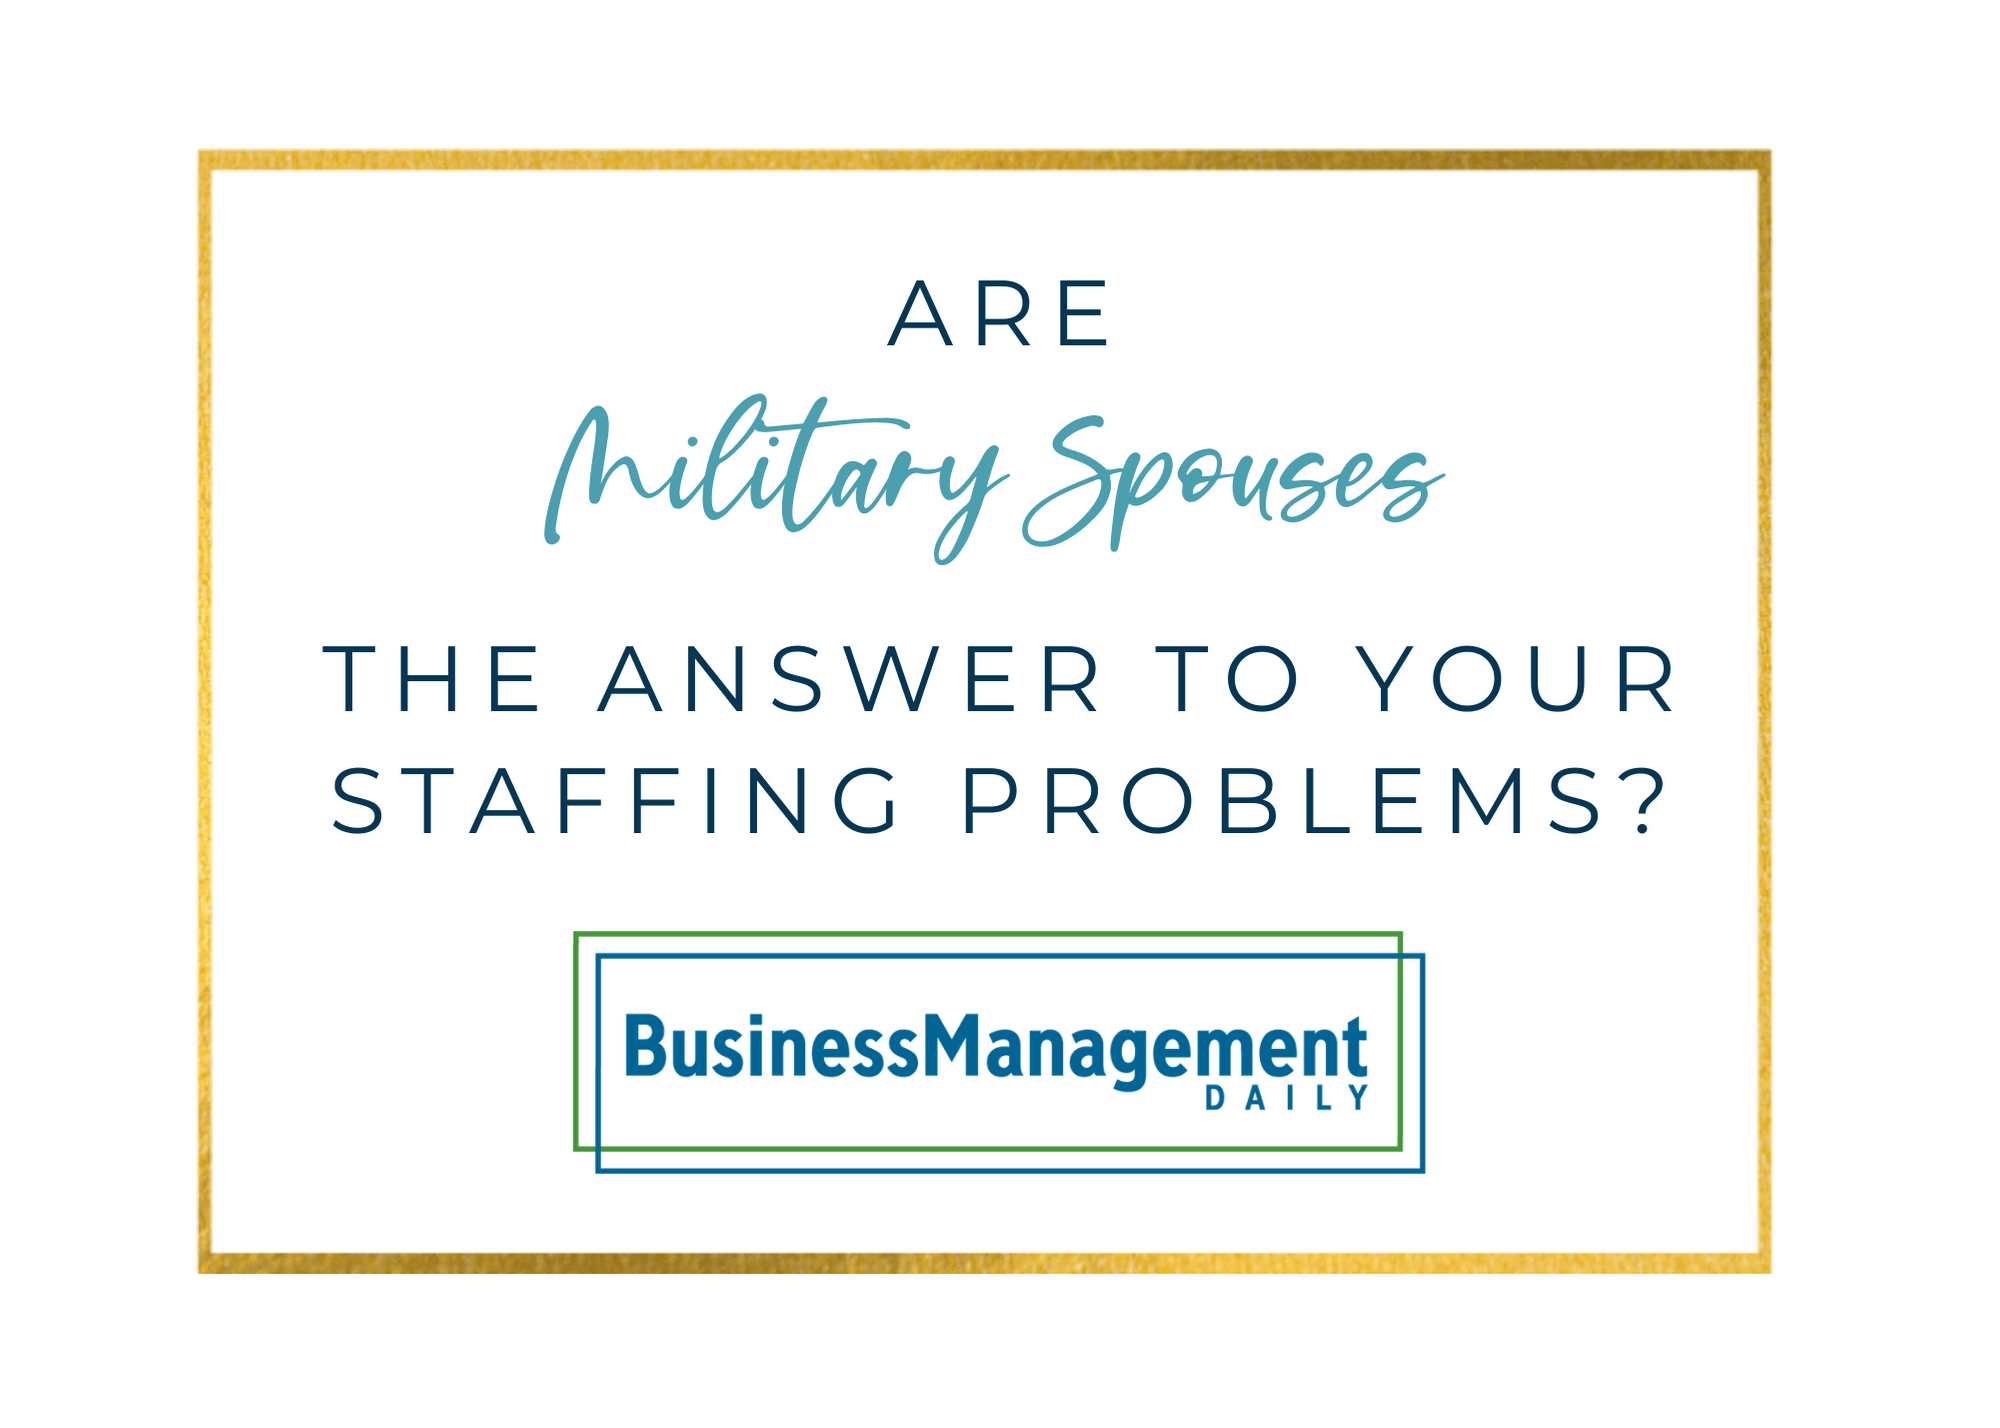 Are military spouses the answer to your staffing problems?